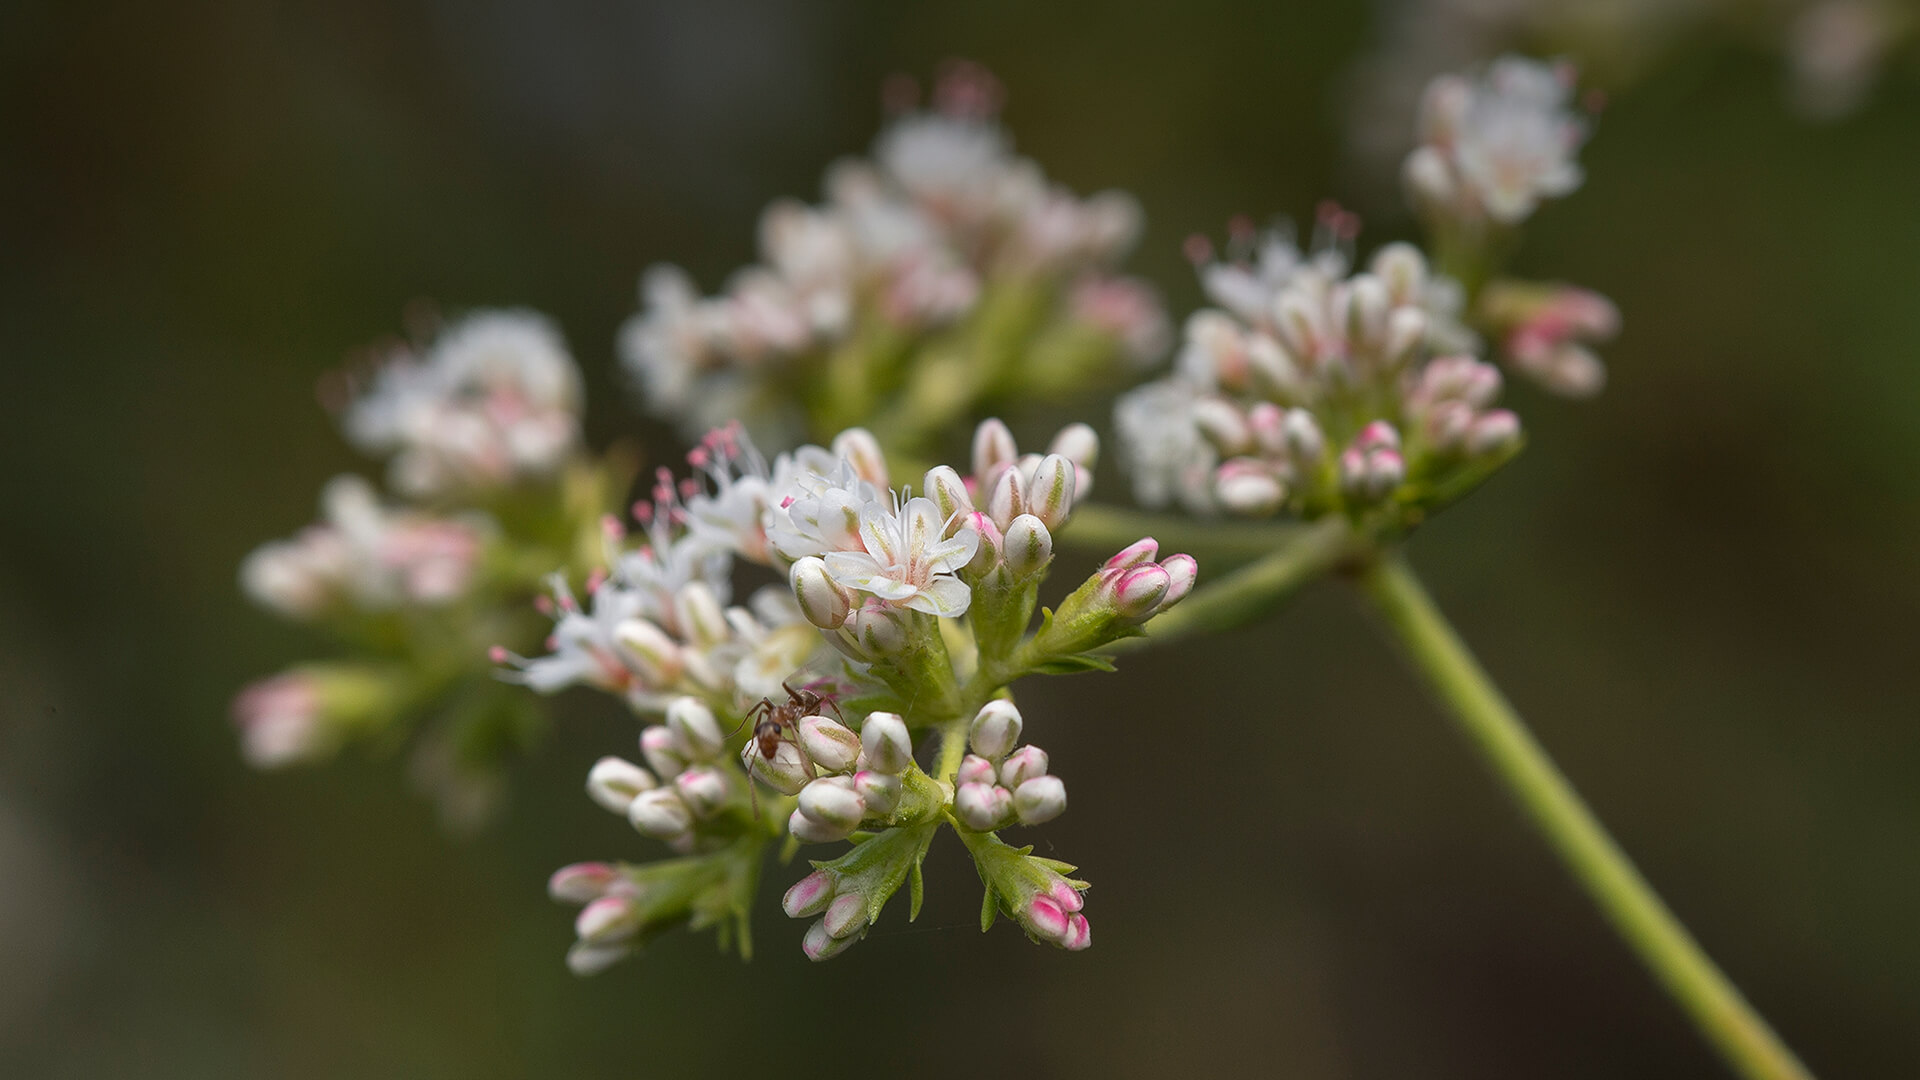 Close-up of a tiny ant crawling on a wild buckwheat's flowers.